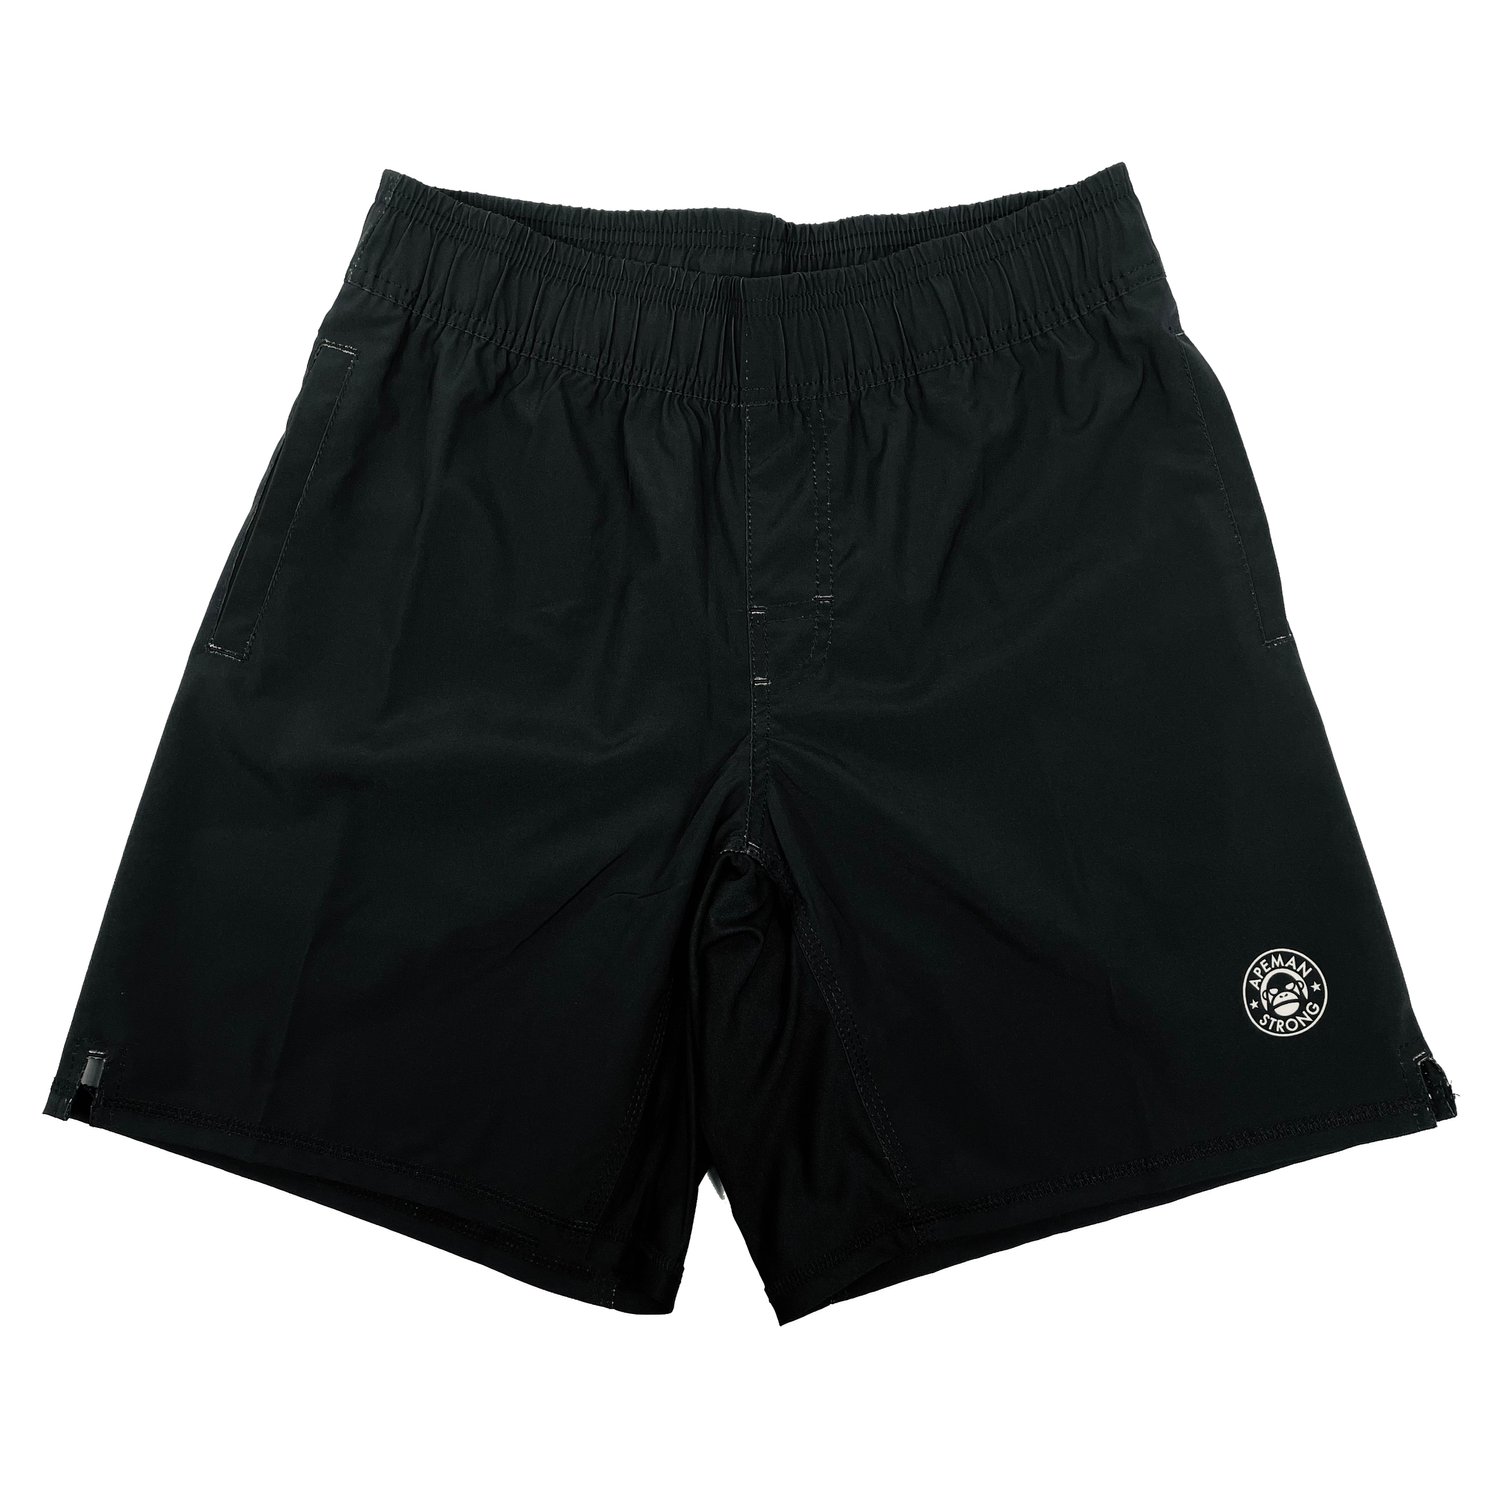 APEMAN STRONG Men's Workout Shorts - Athletic Gym Shorts Sold by Apeman ...